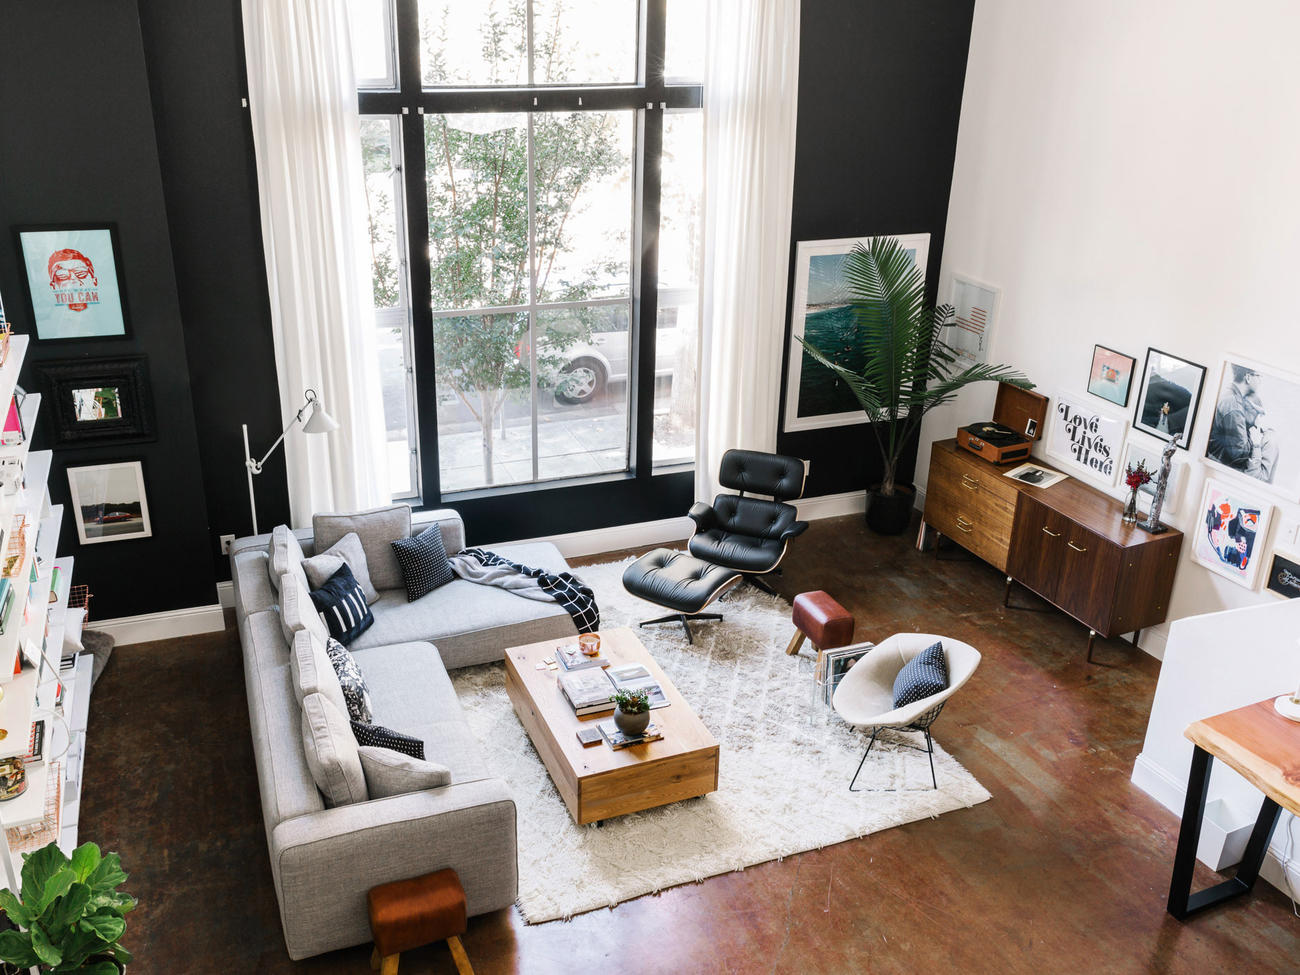 7 Steps to Make Your Living Room #instagramready